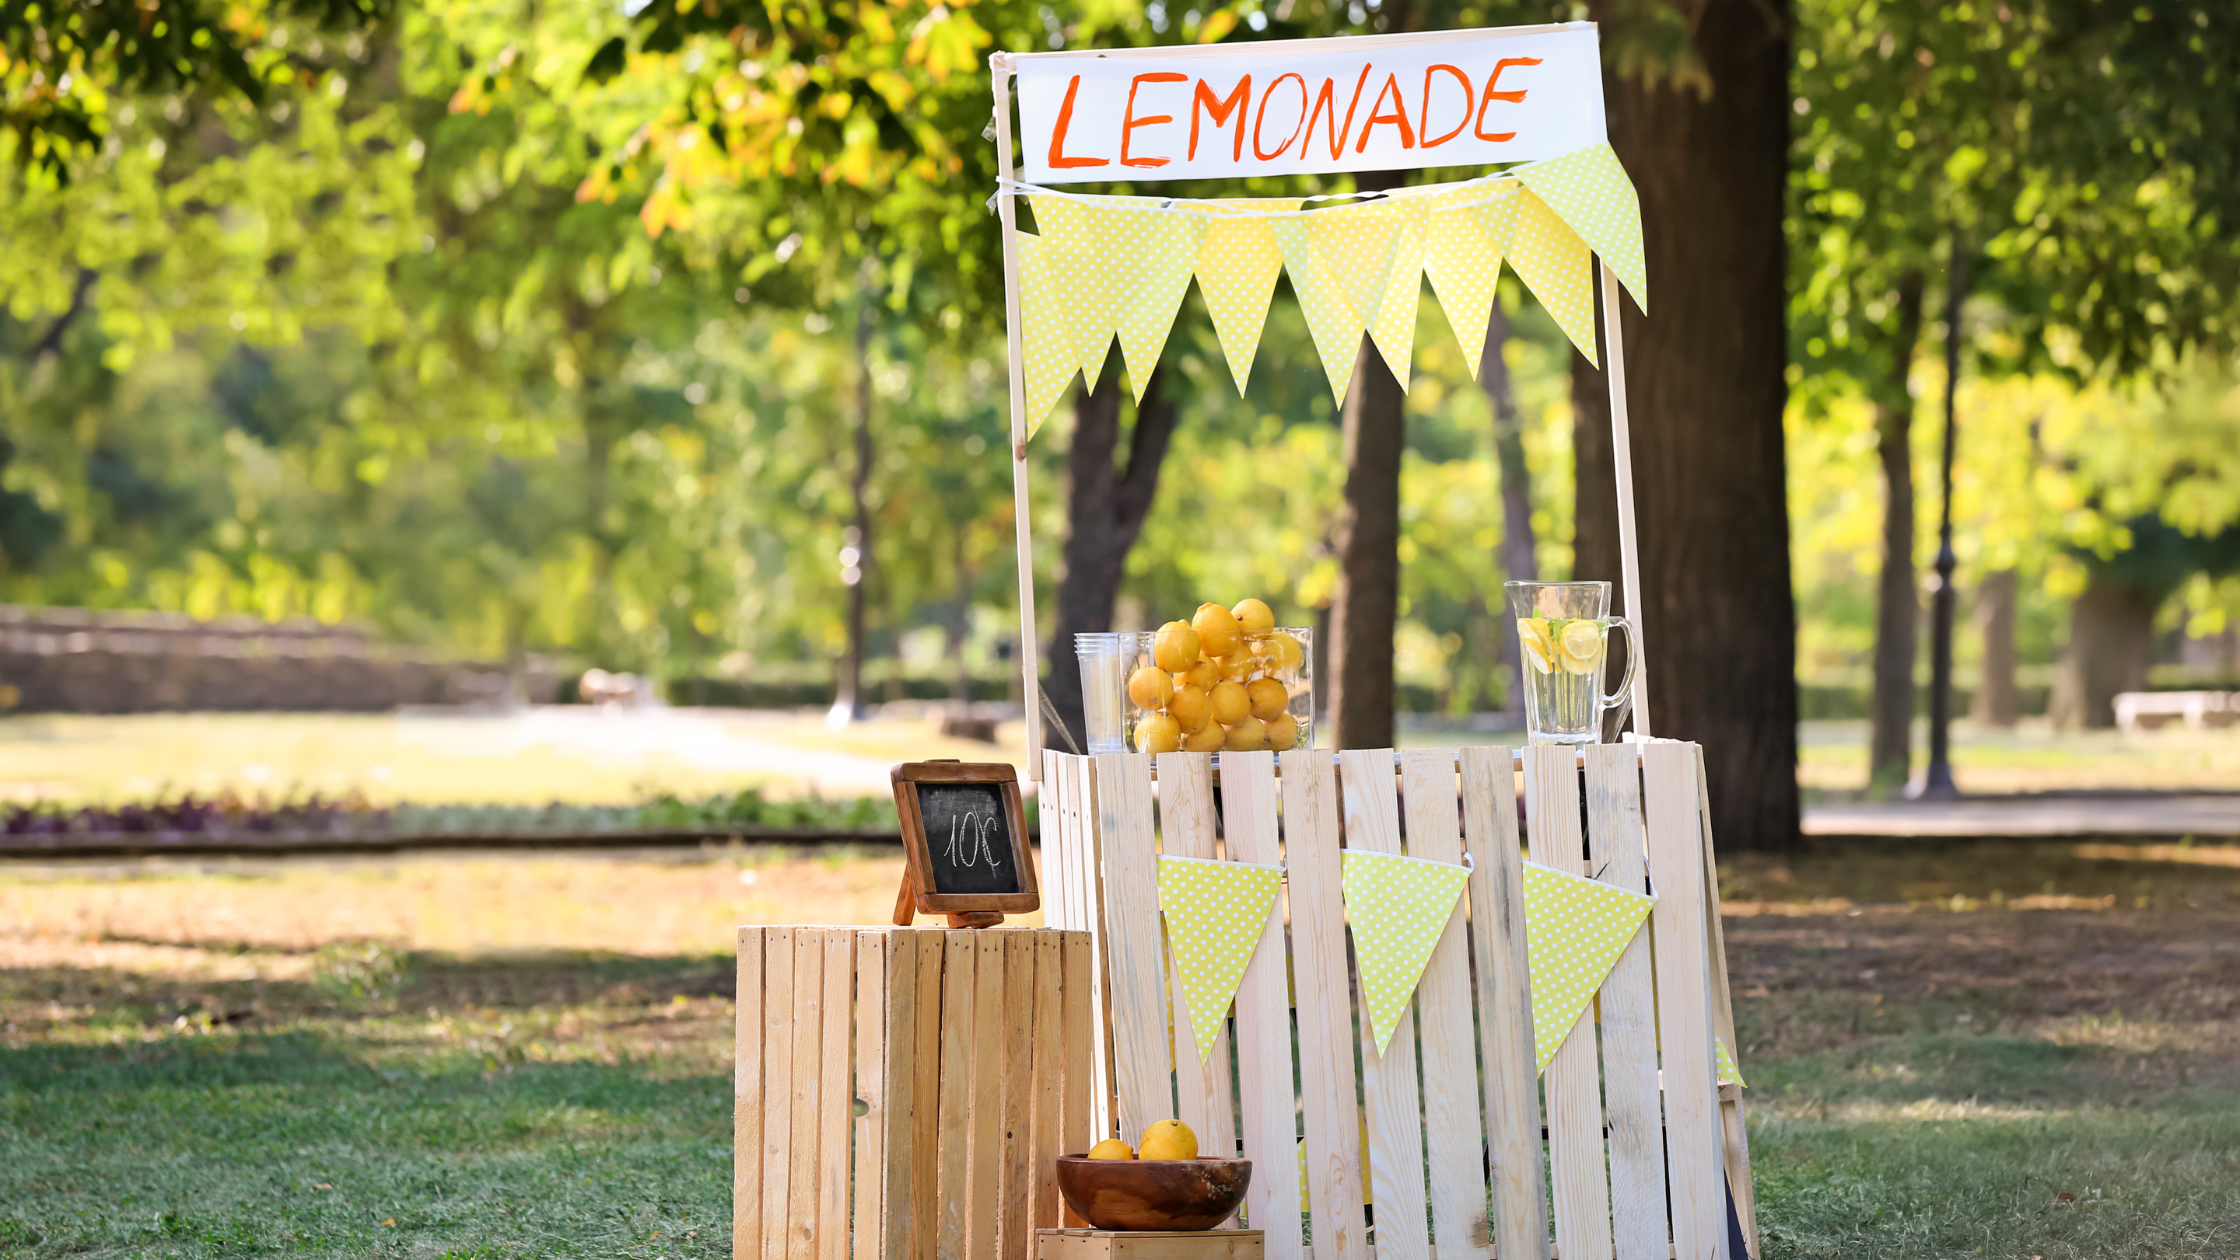 Lemonade stand with lemonade for sale for 10 cents